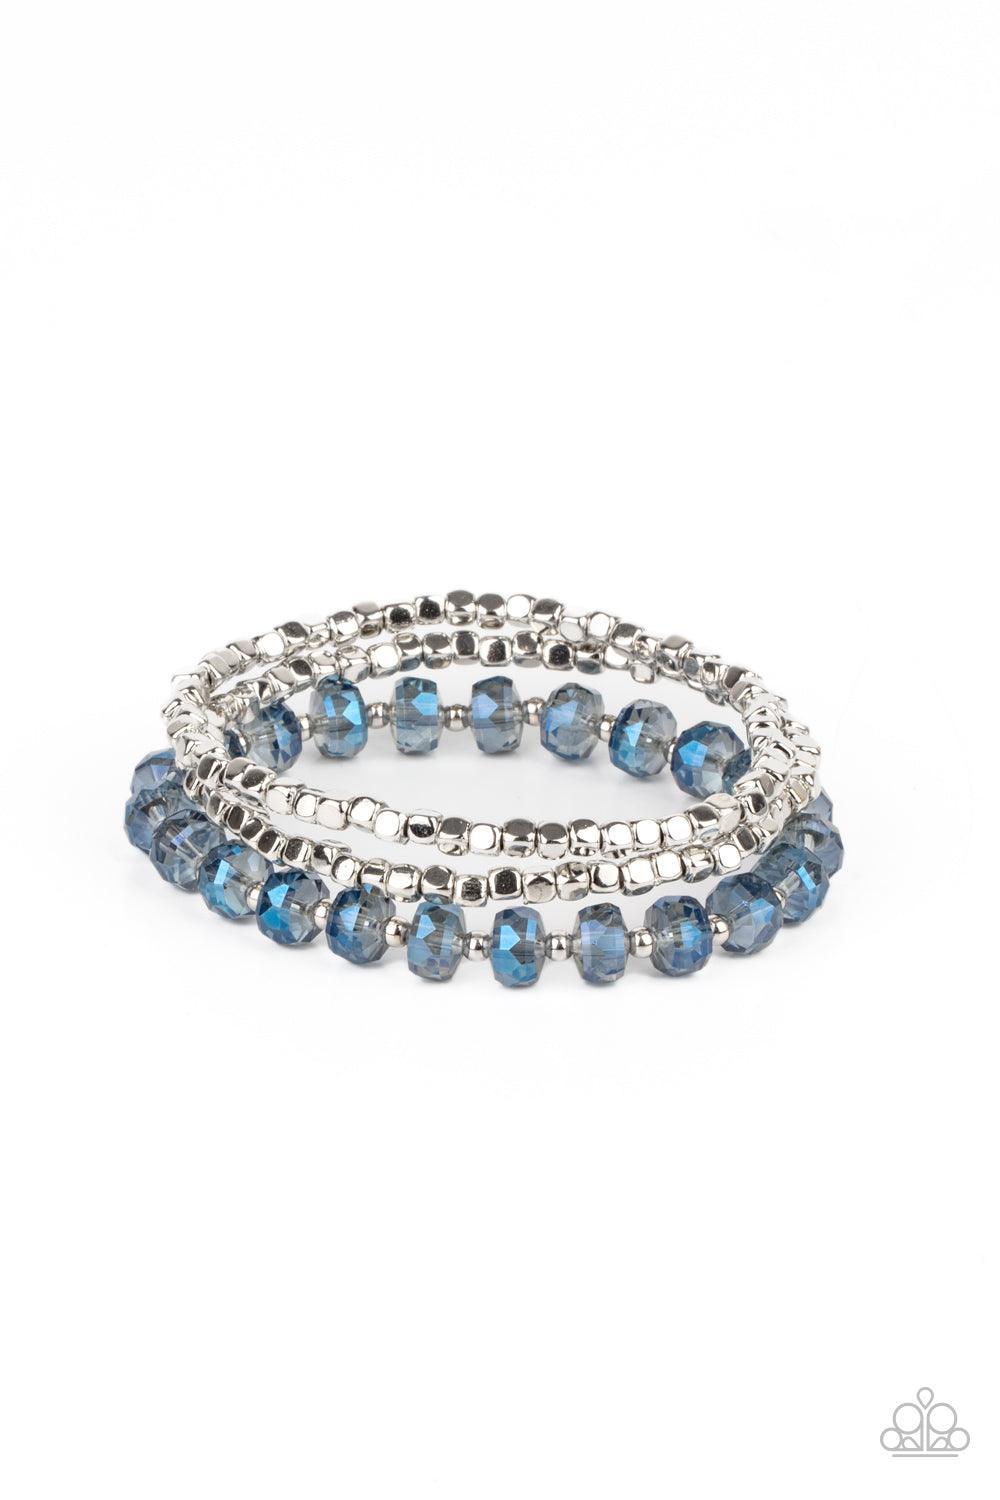 Paparazzi Accessories Celestial Circus - Blue A pair of silver cube beads join one strand of blue crystal-like beads around the wrist, creating iridescently stretchy layers. Sold as one set of three bracelets. Jewelry